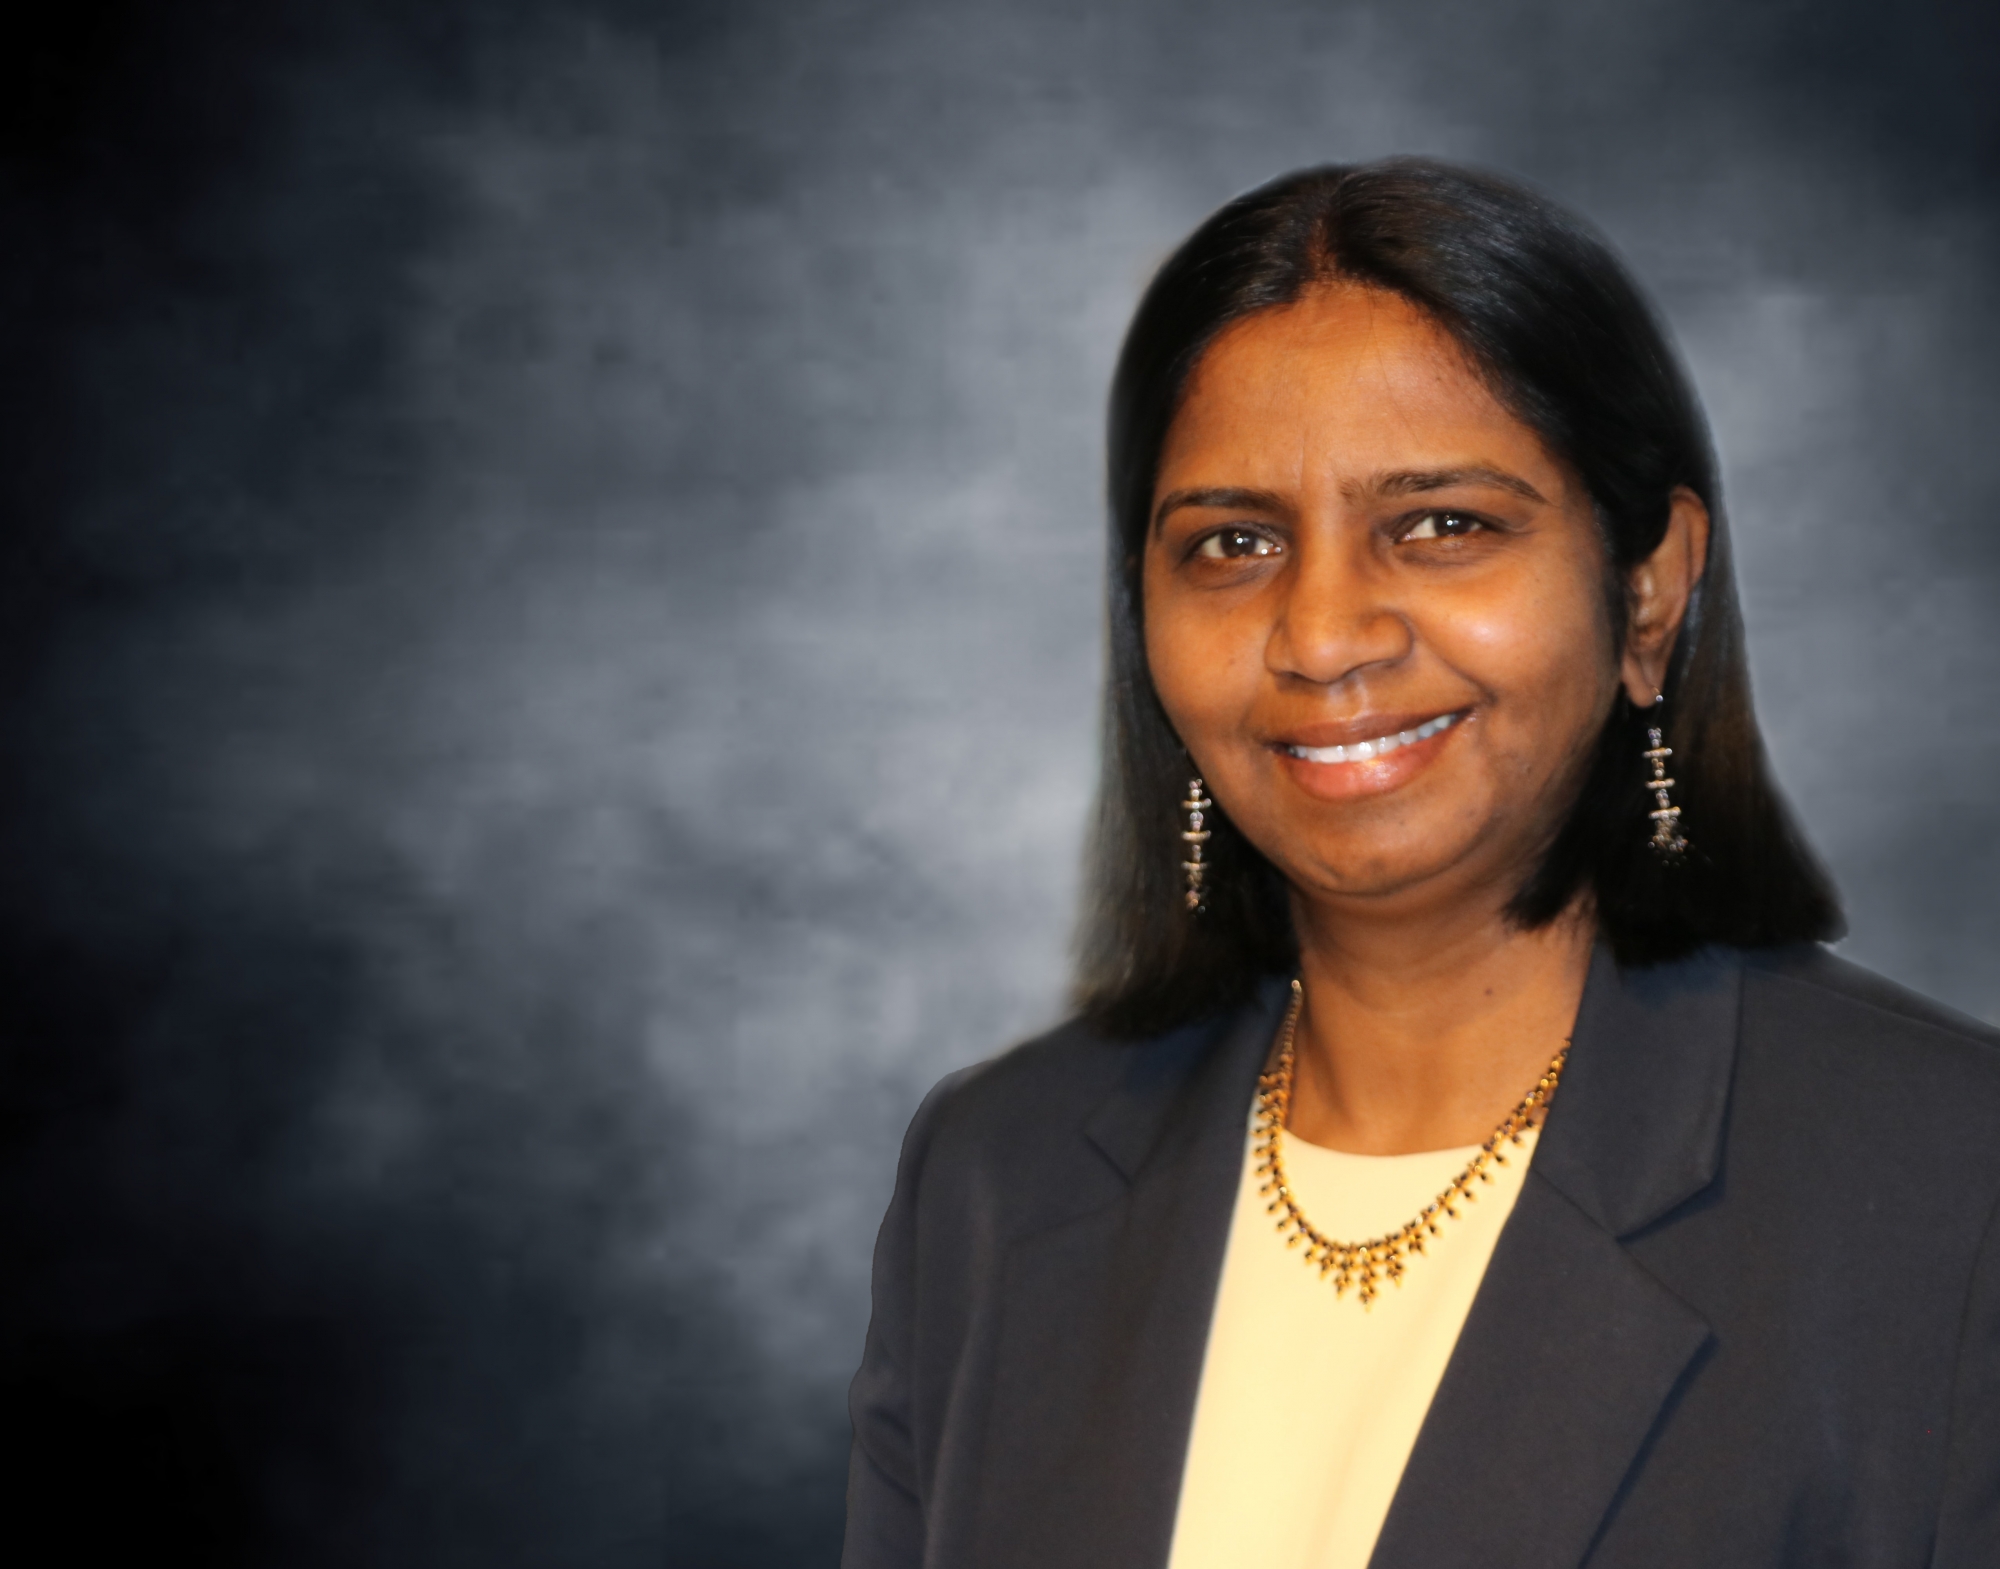 Head and shoulders photo of Shanthi Johnson